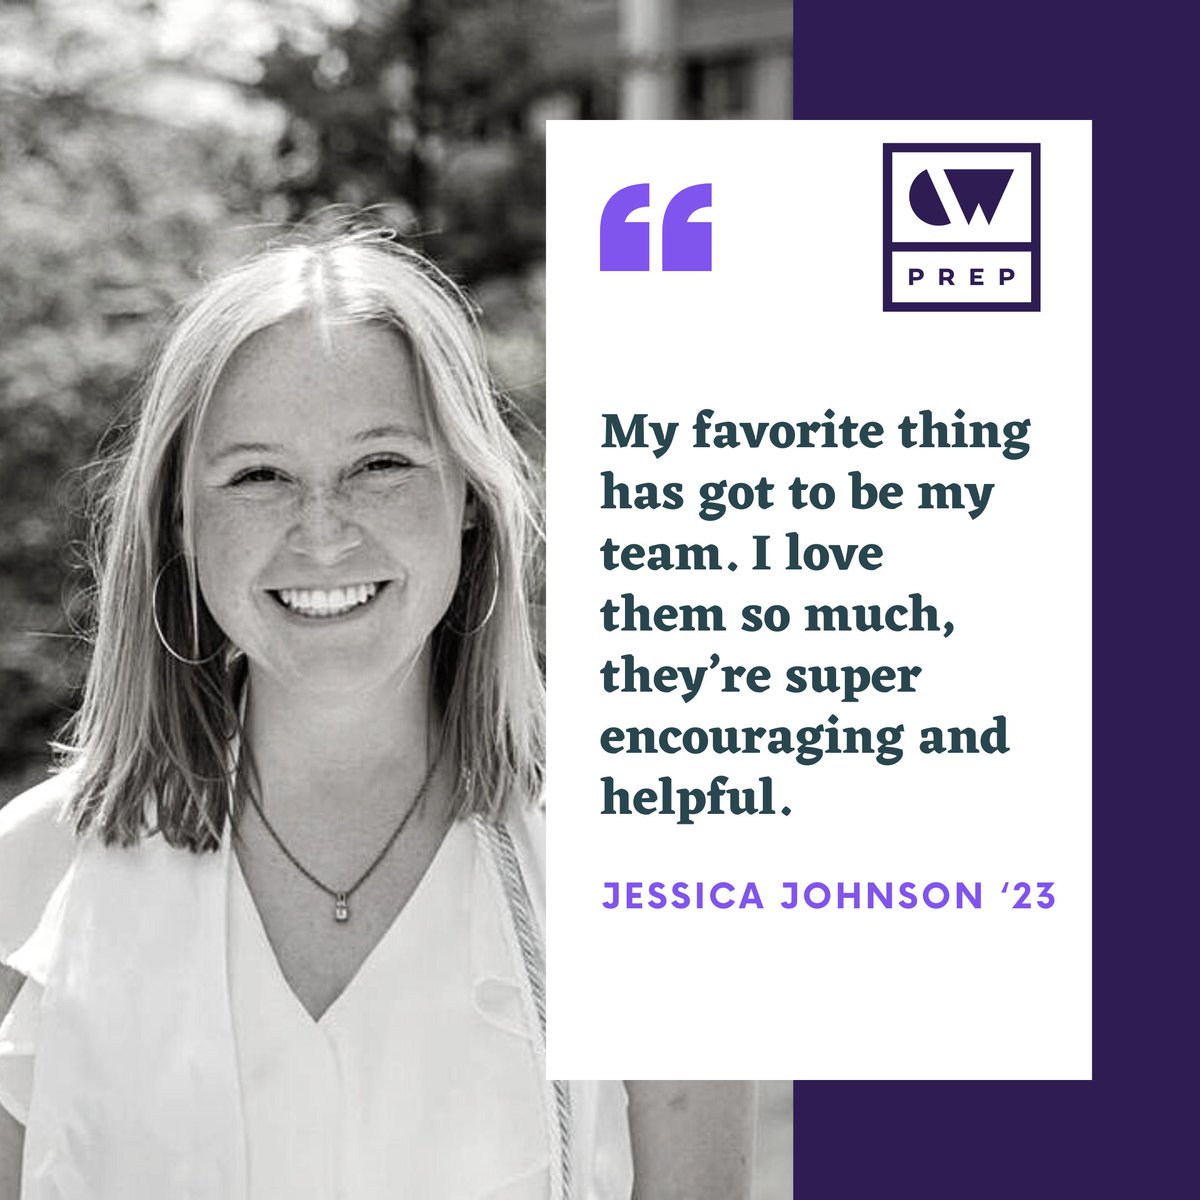 Why work for DCBS? 🤔 We asked our alumni to share their thoughts! We're so happy our students feel supported and encouraged in their careers. 💚 #CWPREP is currently accepting applications! Earn your #socialwork degree with 4 semesters of free tuition 🎓 bit.ly/3tbCRSk